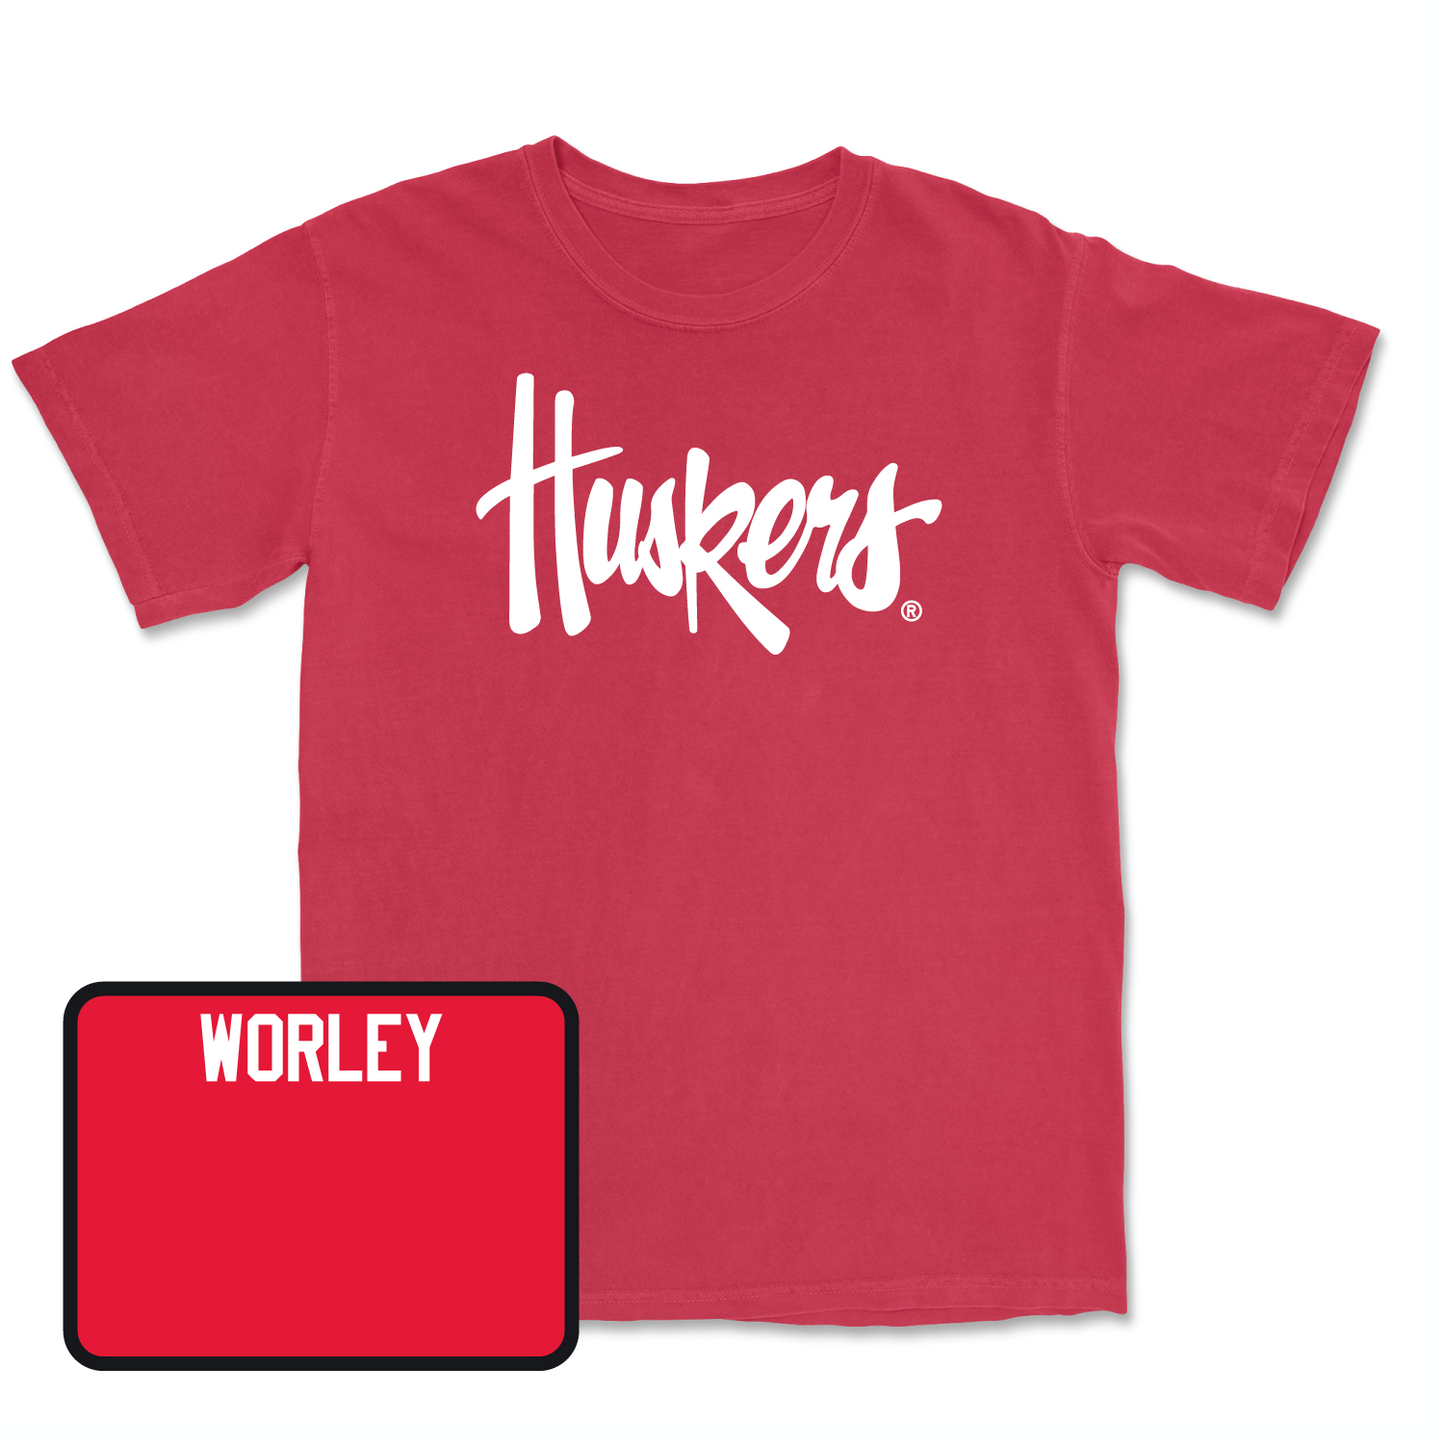 Red Women's Gymnastics Huskers Tee 4X-Large / Annie Worley